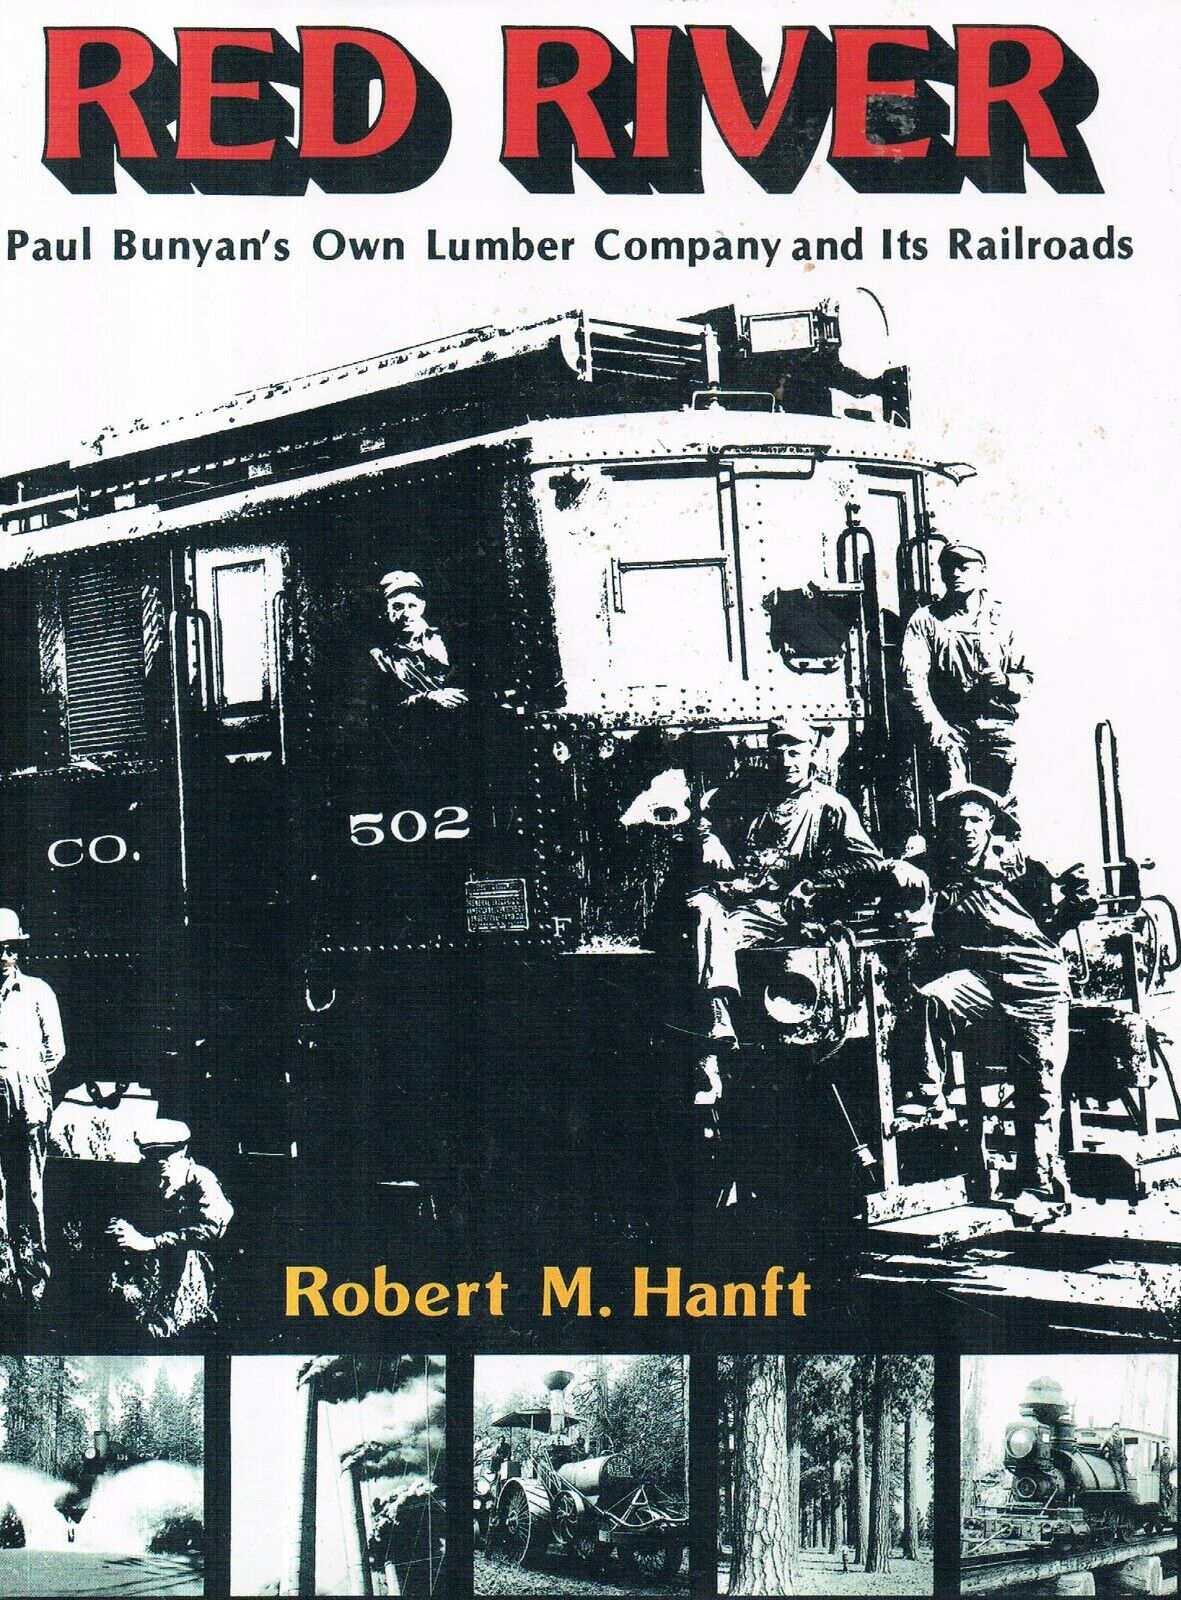 Red River Paul Bunyan's Own Lumber Company and its Railroads hardcover, DJ Hanft